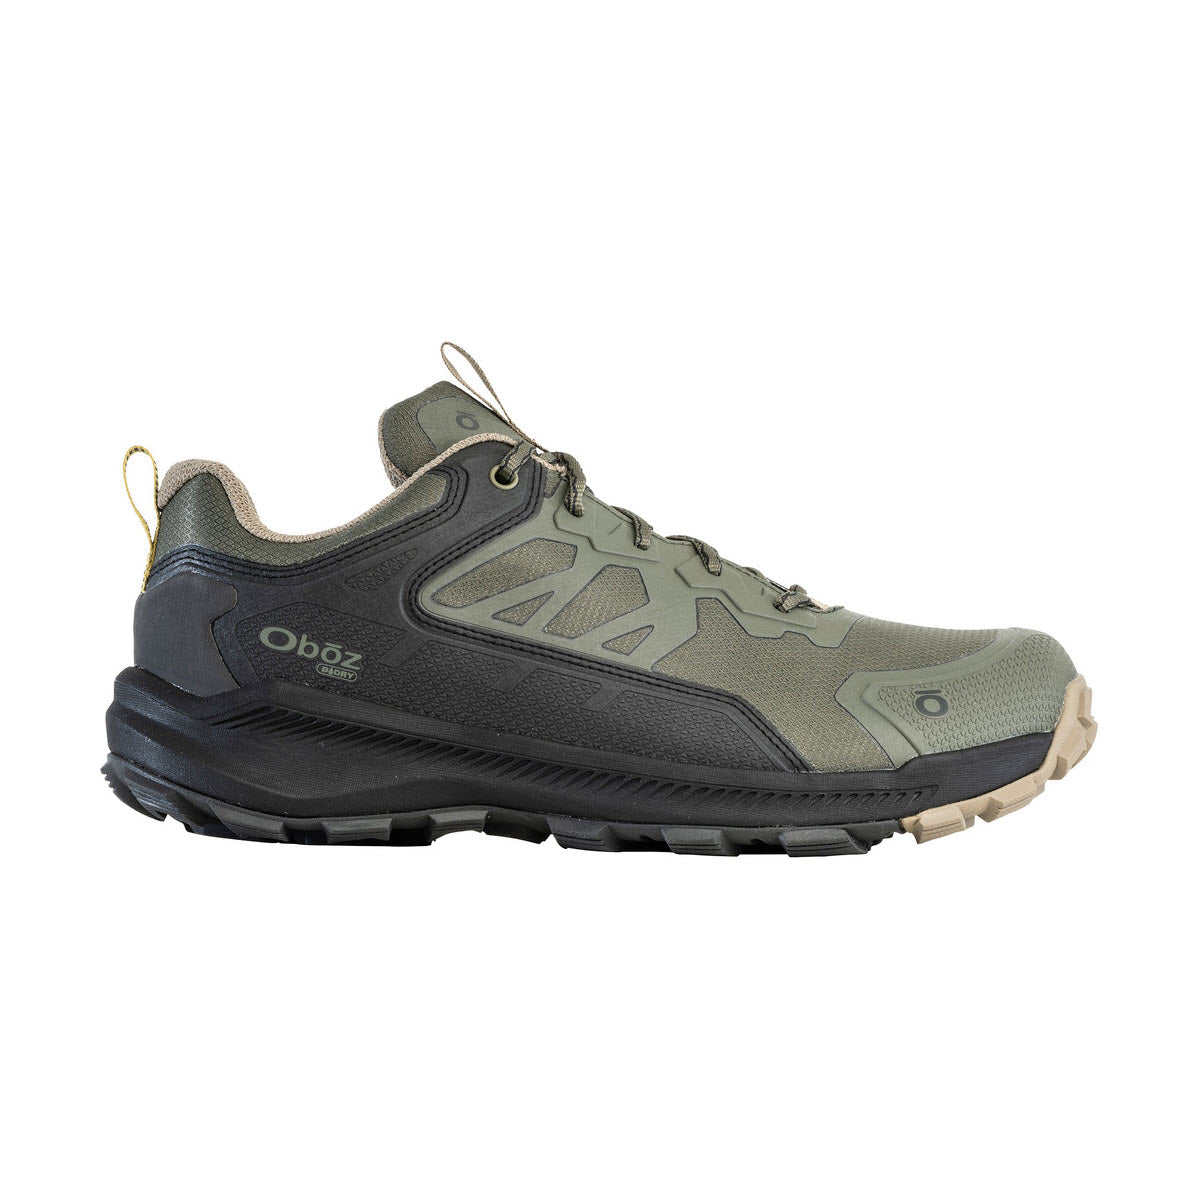 A single green and black Oboz Katabatic Low B-Dry Evergreen men&#39;s hiking shoe on a white background.